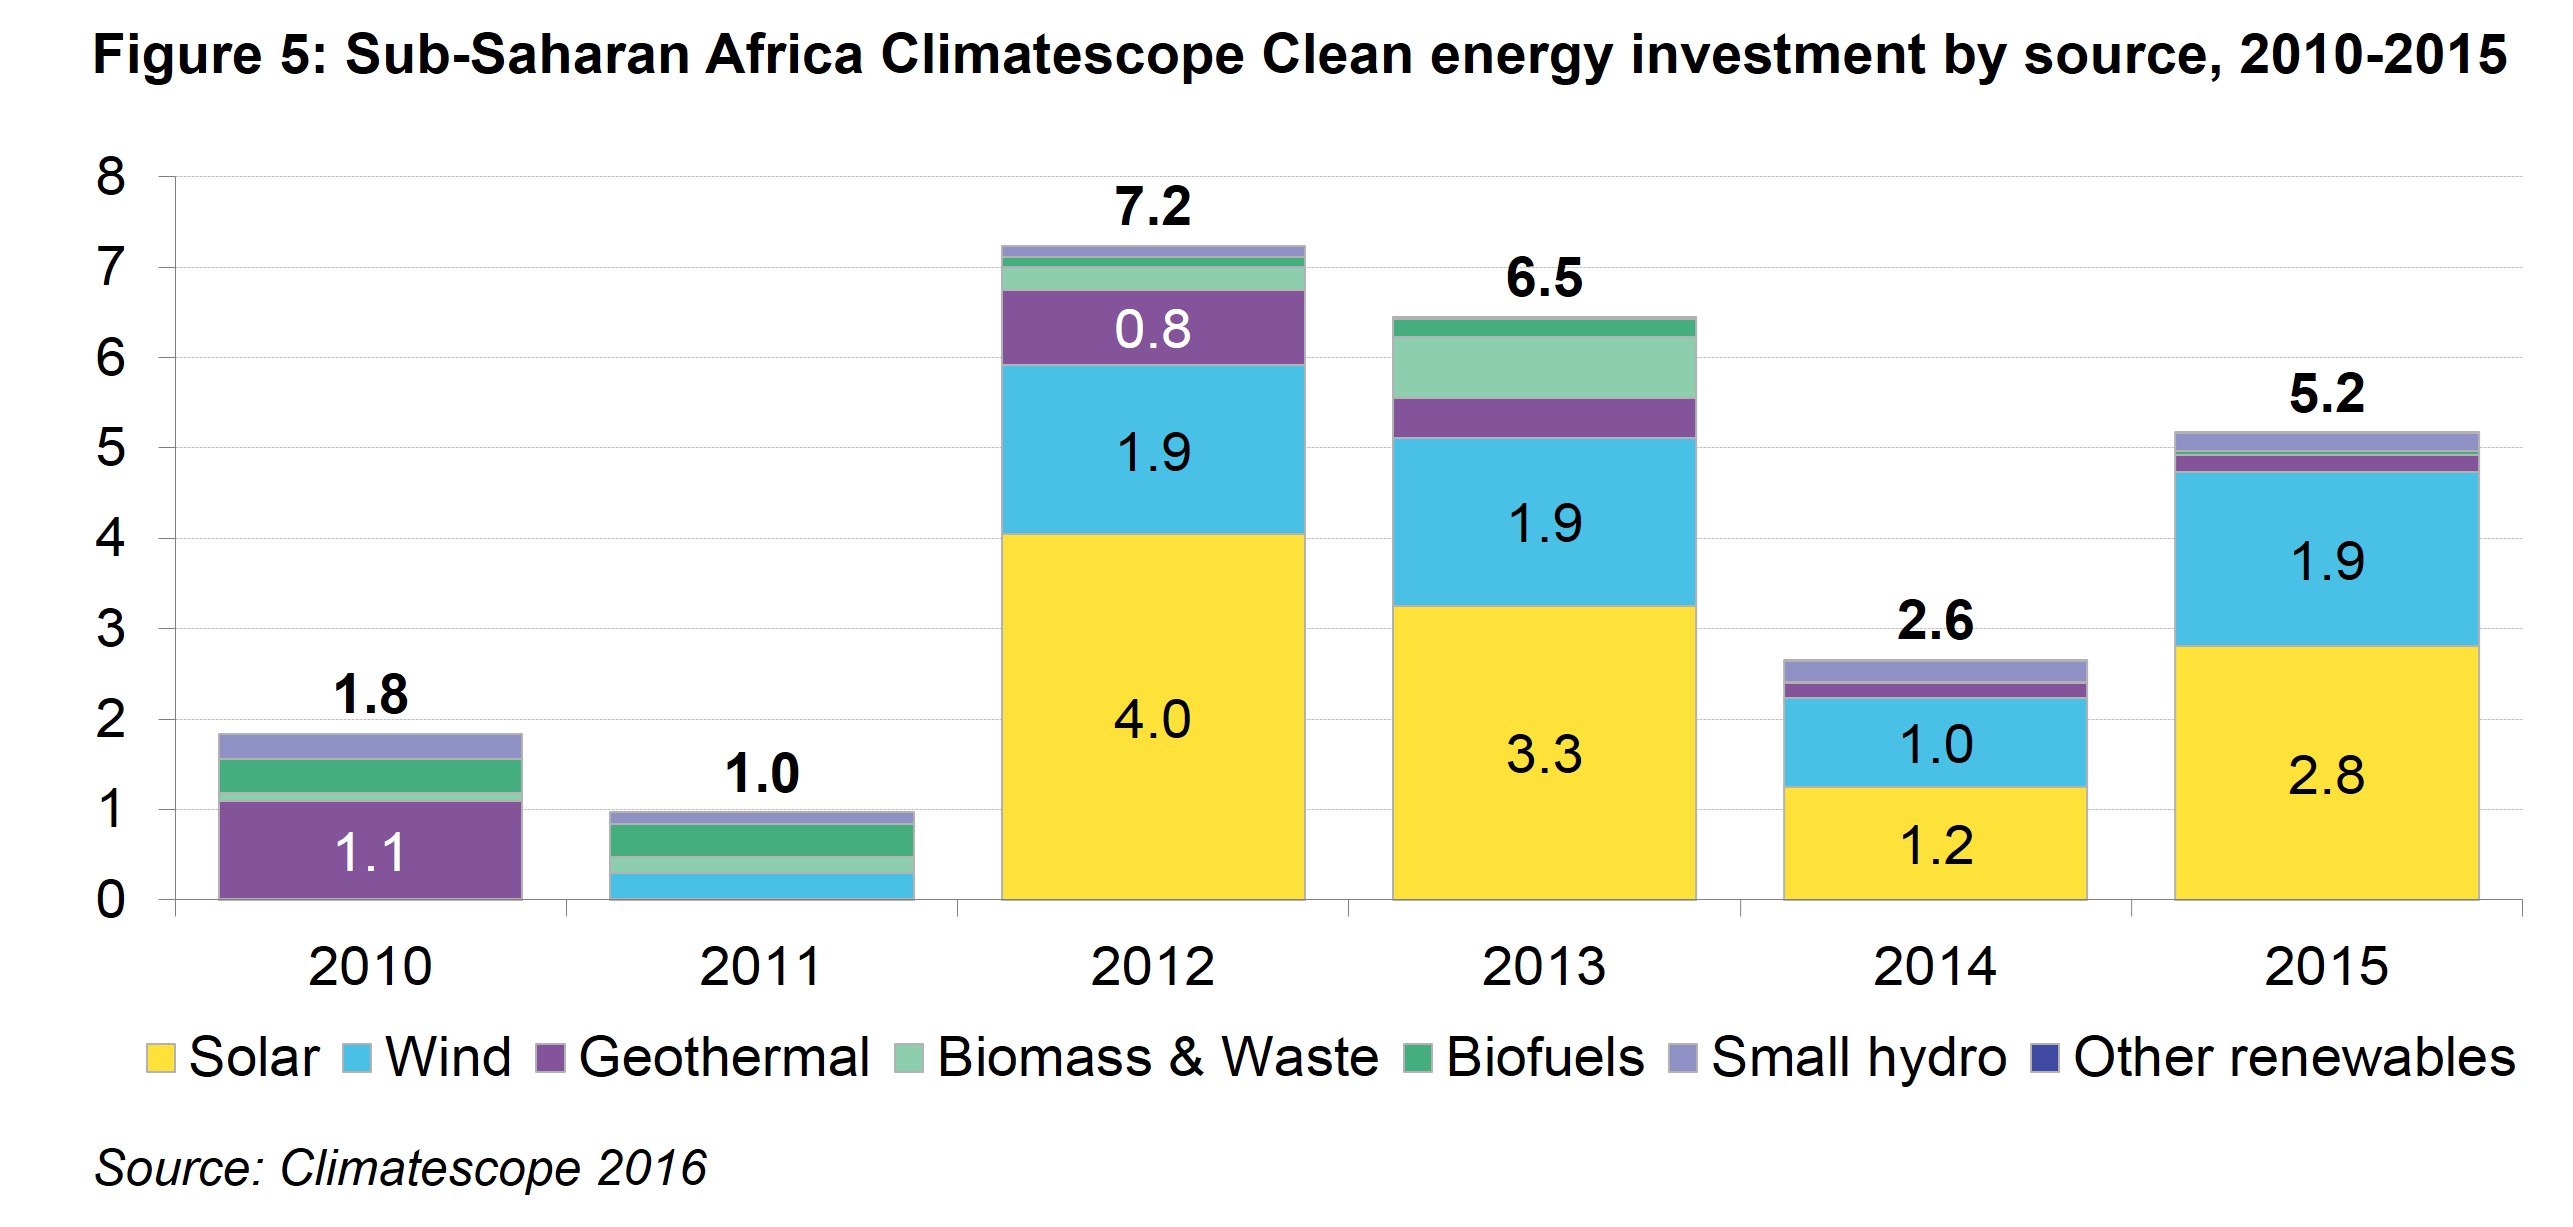 AM Fig 5 -  Sub-Saharan Africa Climatescope Clean energy investment by source, 2010 - 2015 